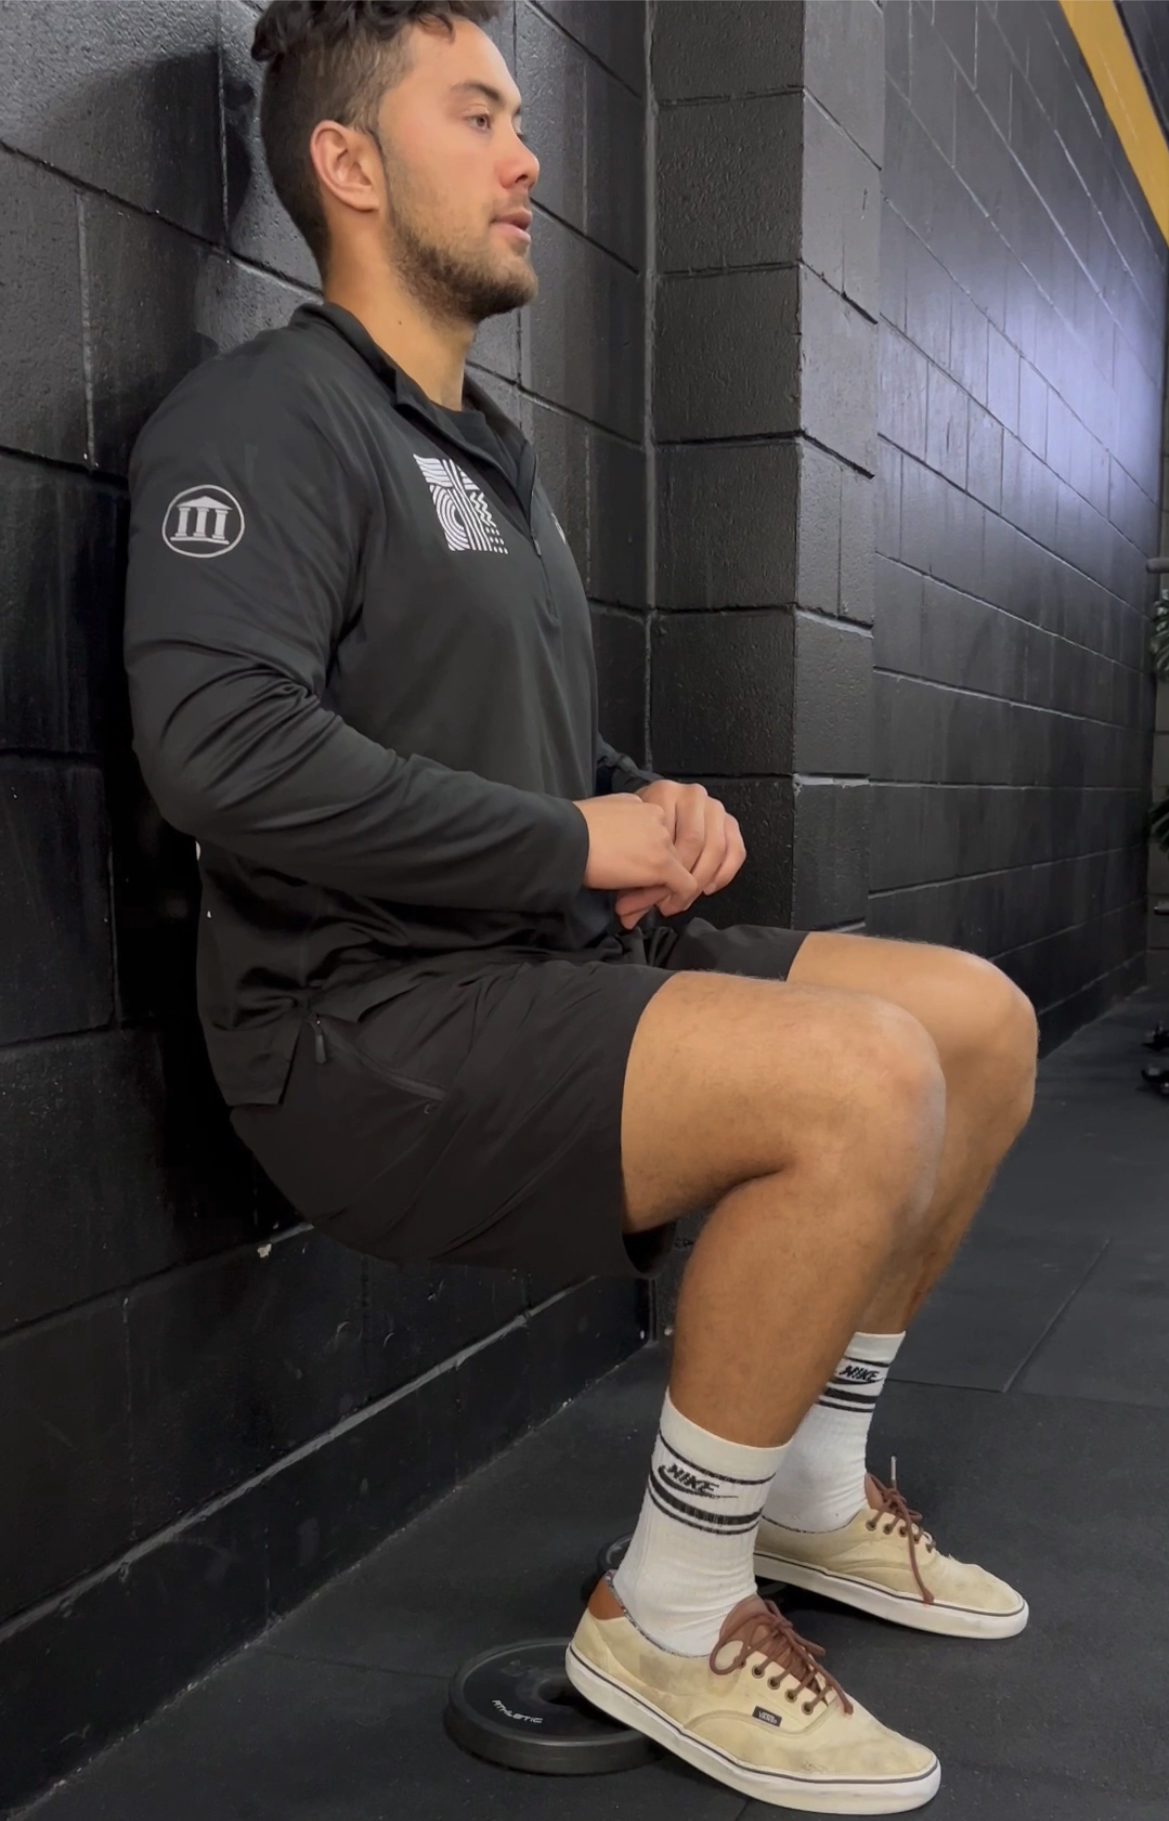 Read more about the article Decline Wall Sits: An Easy Exercise for Patella Tendon Strength